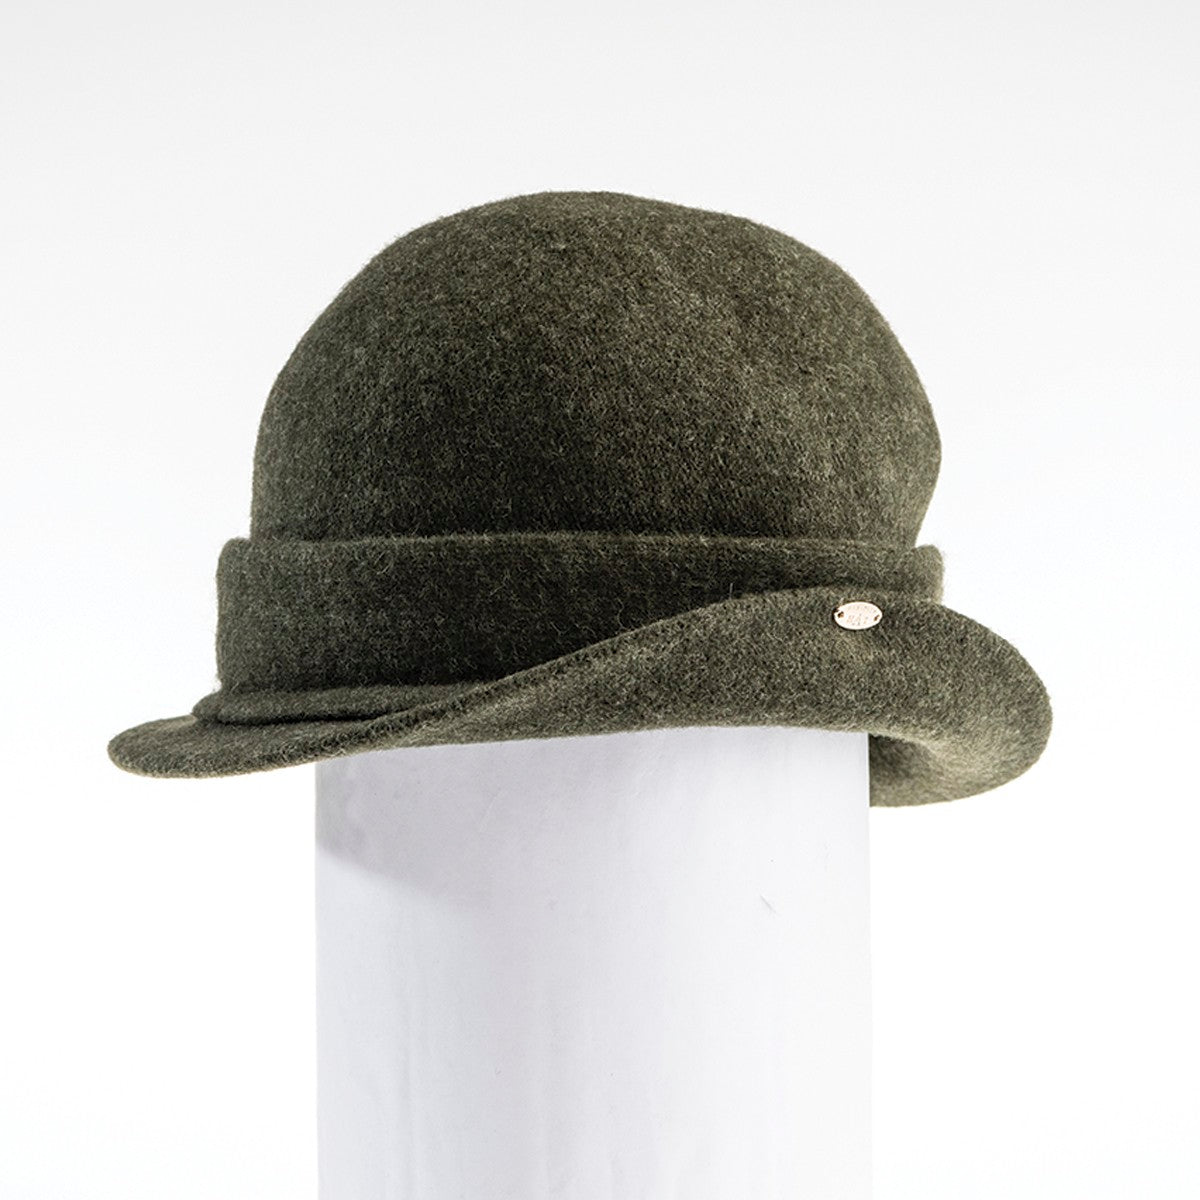 OKENA - ORMOS CLOCHE HAT WITH SIDE RISE